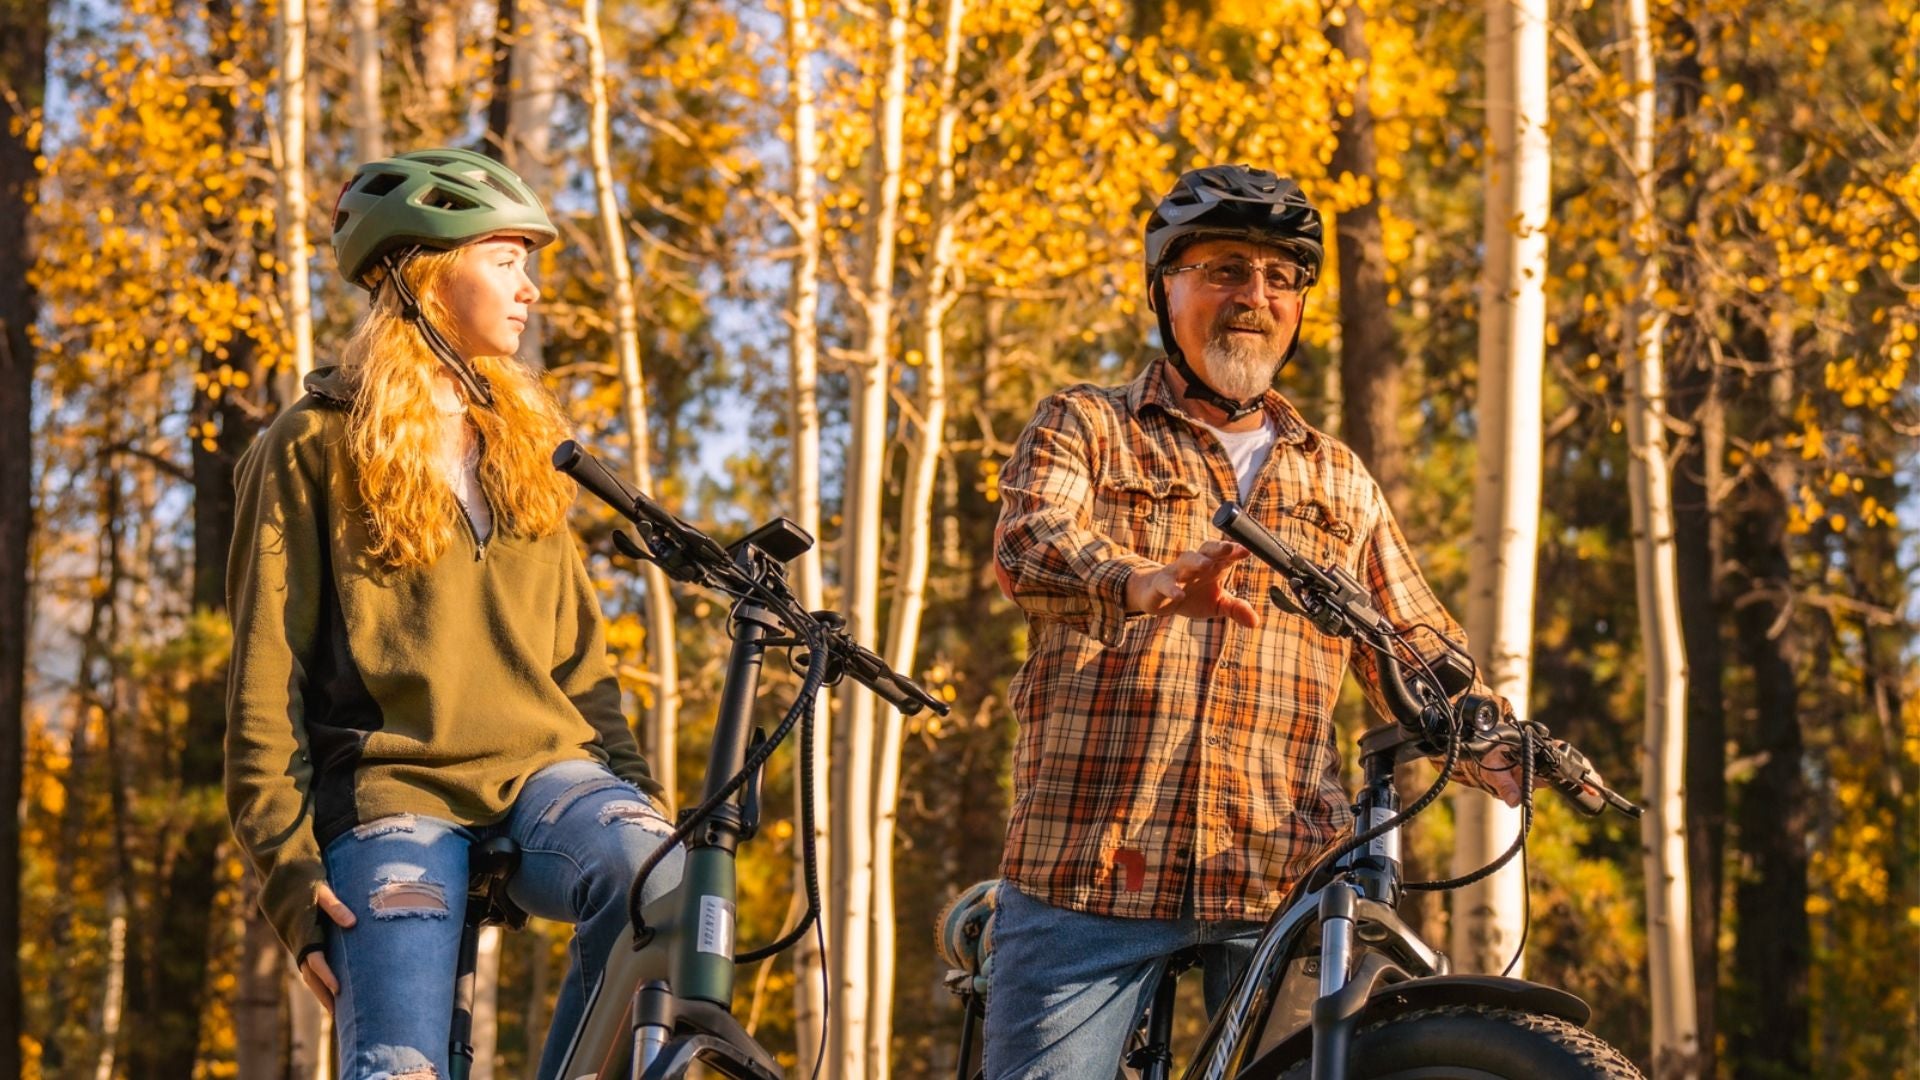 There Are So Many Benefits for Seniors, Older Adults Who Ride Bikes